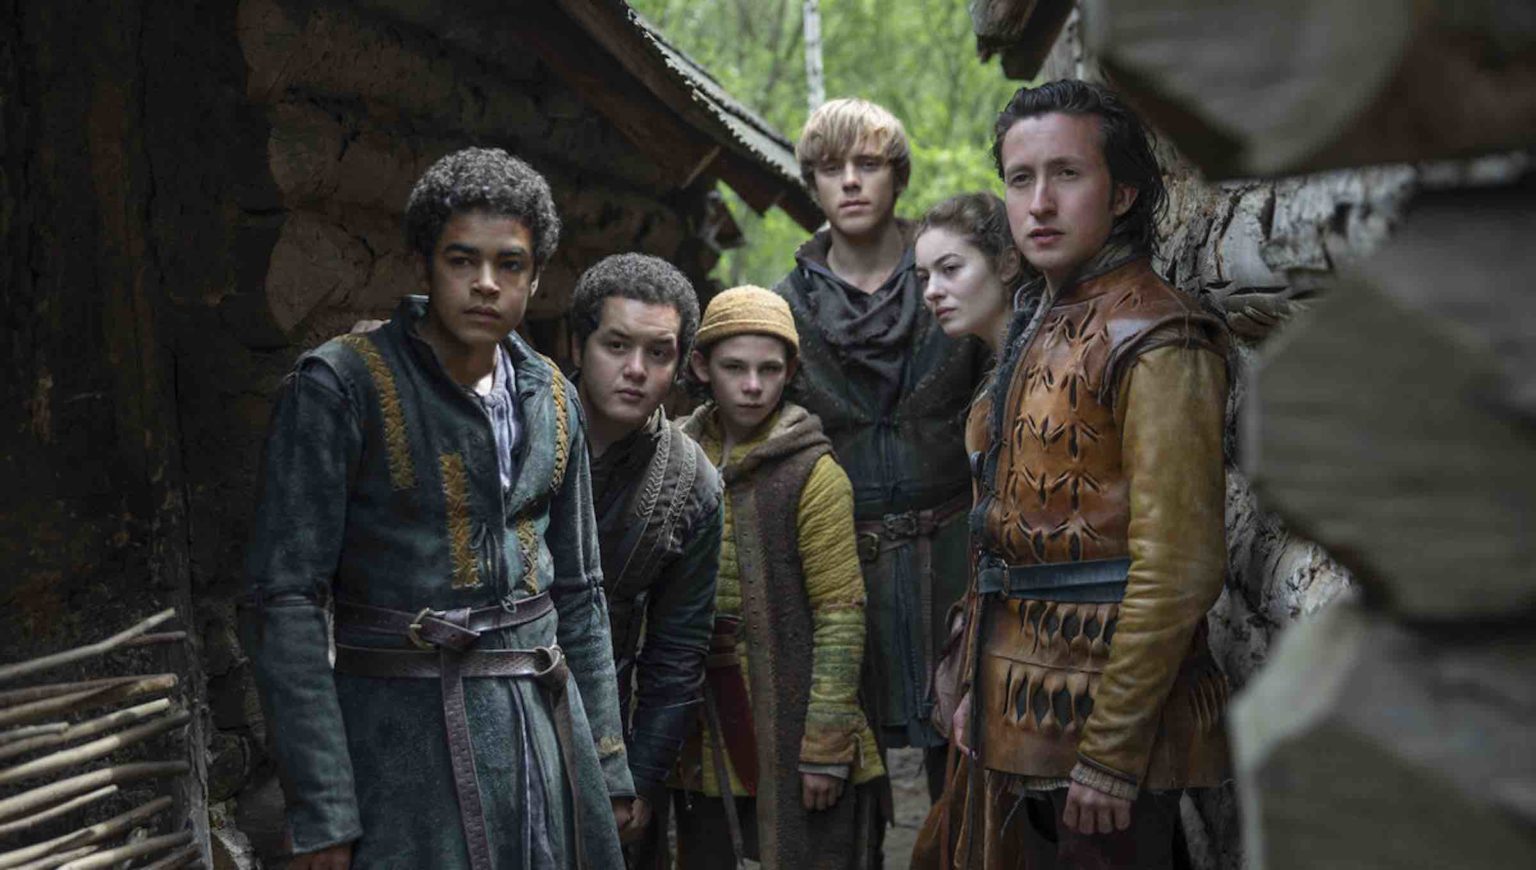 Netflix has debuted a teaser for its new family and kids series 'The Letter for the King'. Here's everything we know about the show.